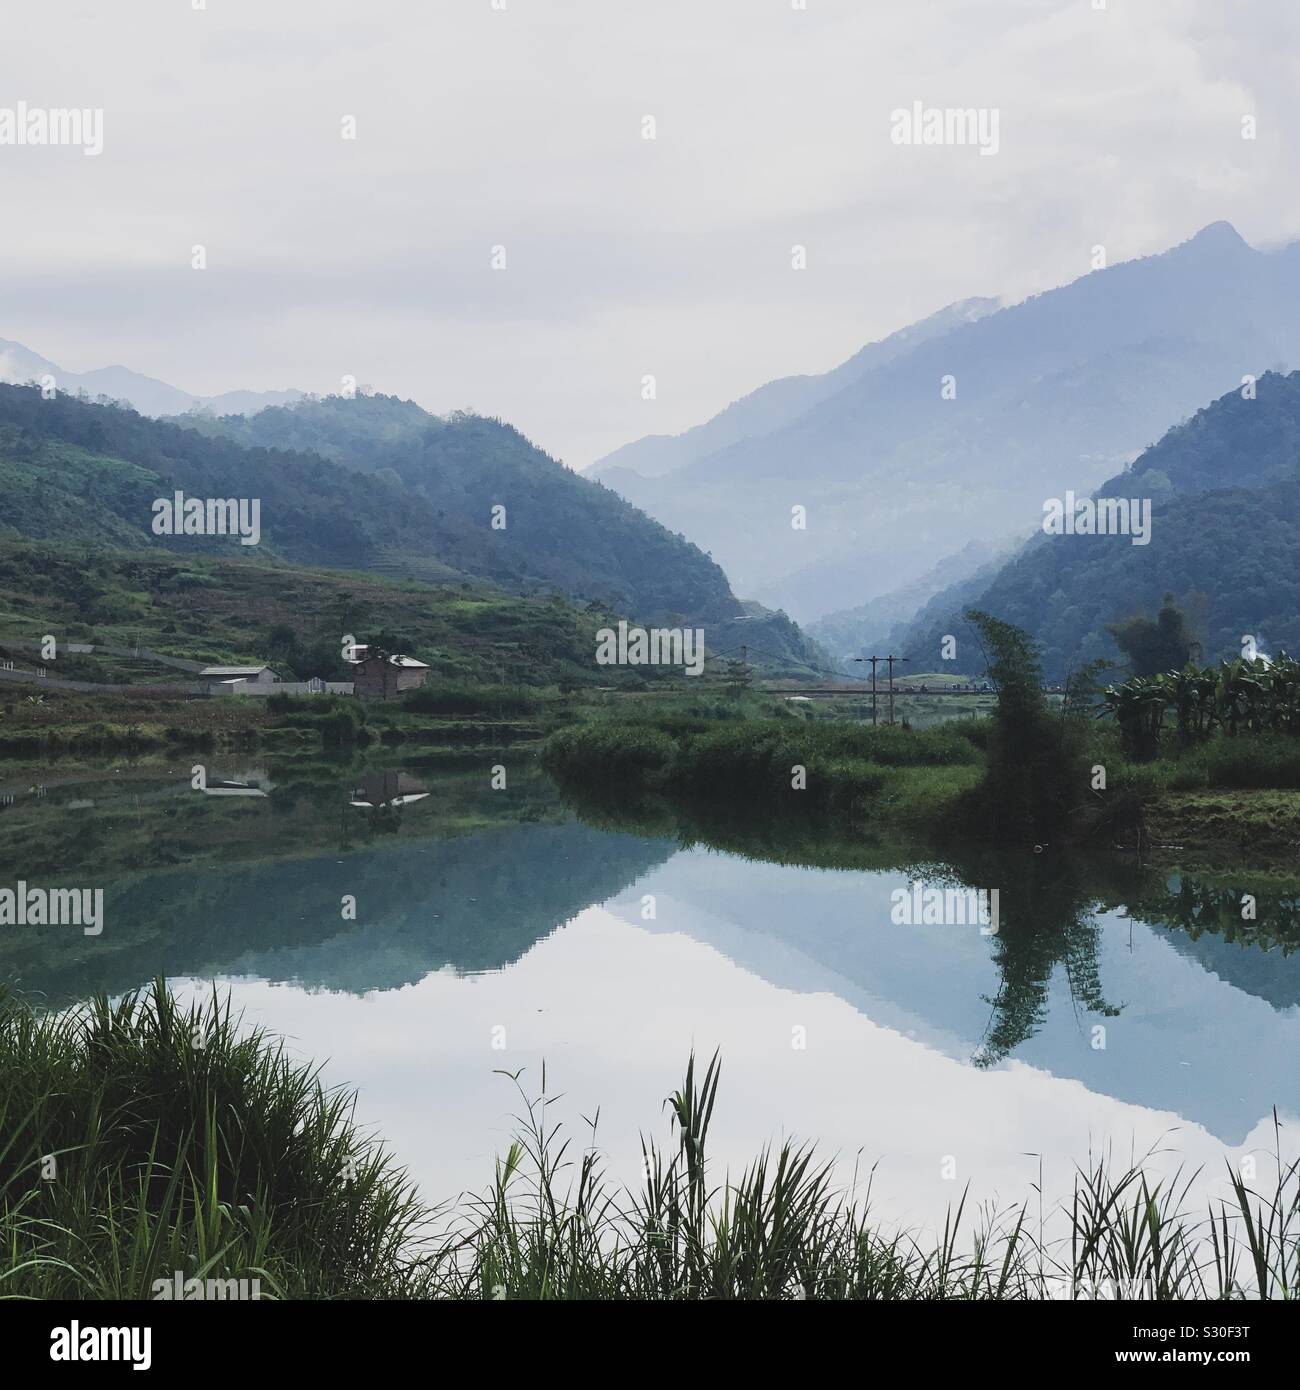 Reflections on Song Lo River in Quan Ba District, Ha Giang, Vietnam. Blue hues of mountain range with still glass like water. Near Song Mien village. Stock Photo